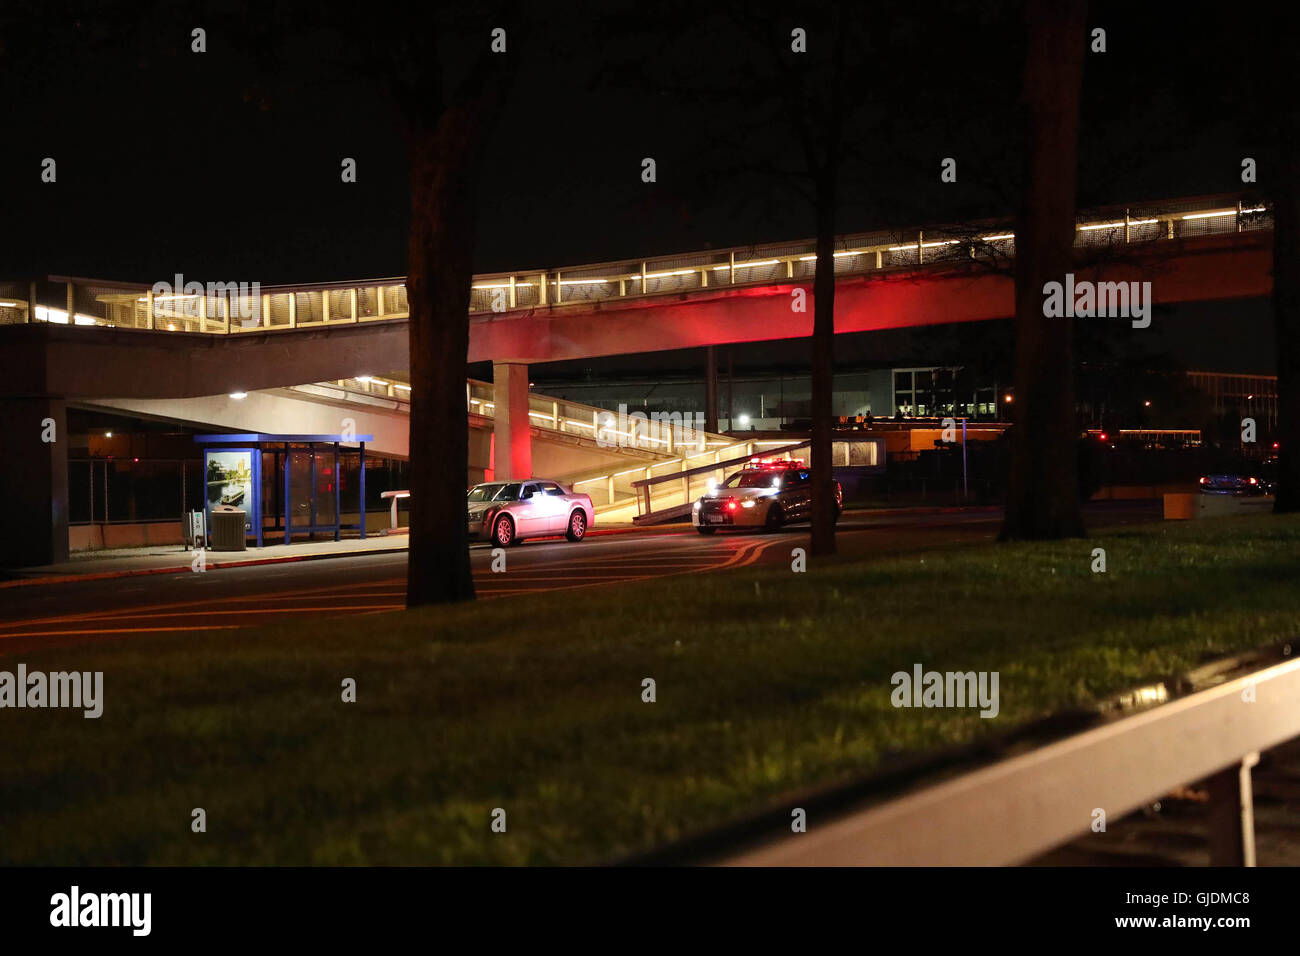 New York, USA. 14th Aug, 2016. A police car is seen at the JFK International Airport in New York, the United States, on Aug. 14, 2016. All the flights at the JFK International Airport in New York have been suspended due to reports of shooting inside a terminal, local media said on Sunday. Credit:  Tao Chen/Xinhua/Alamy Live News Stock Photo